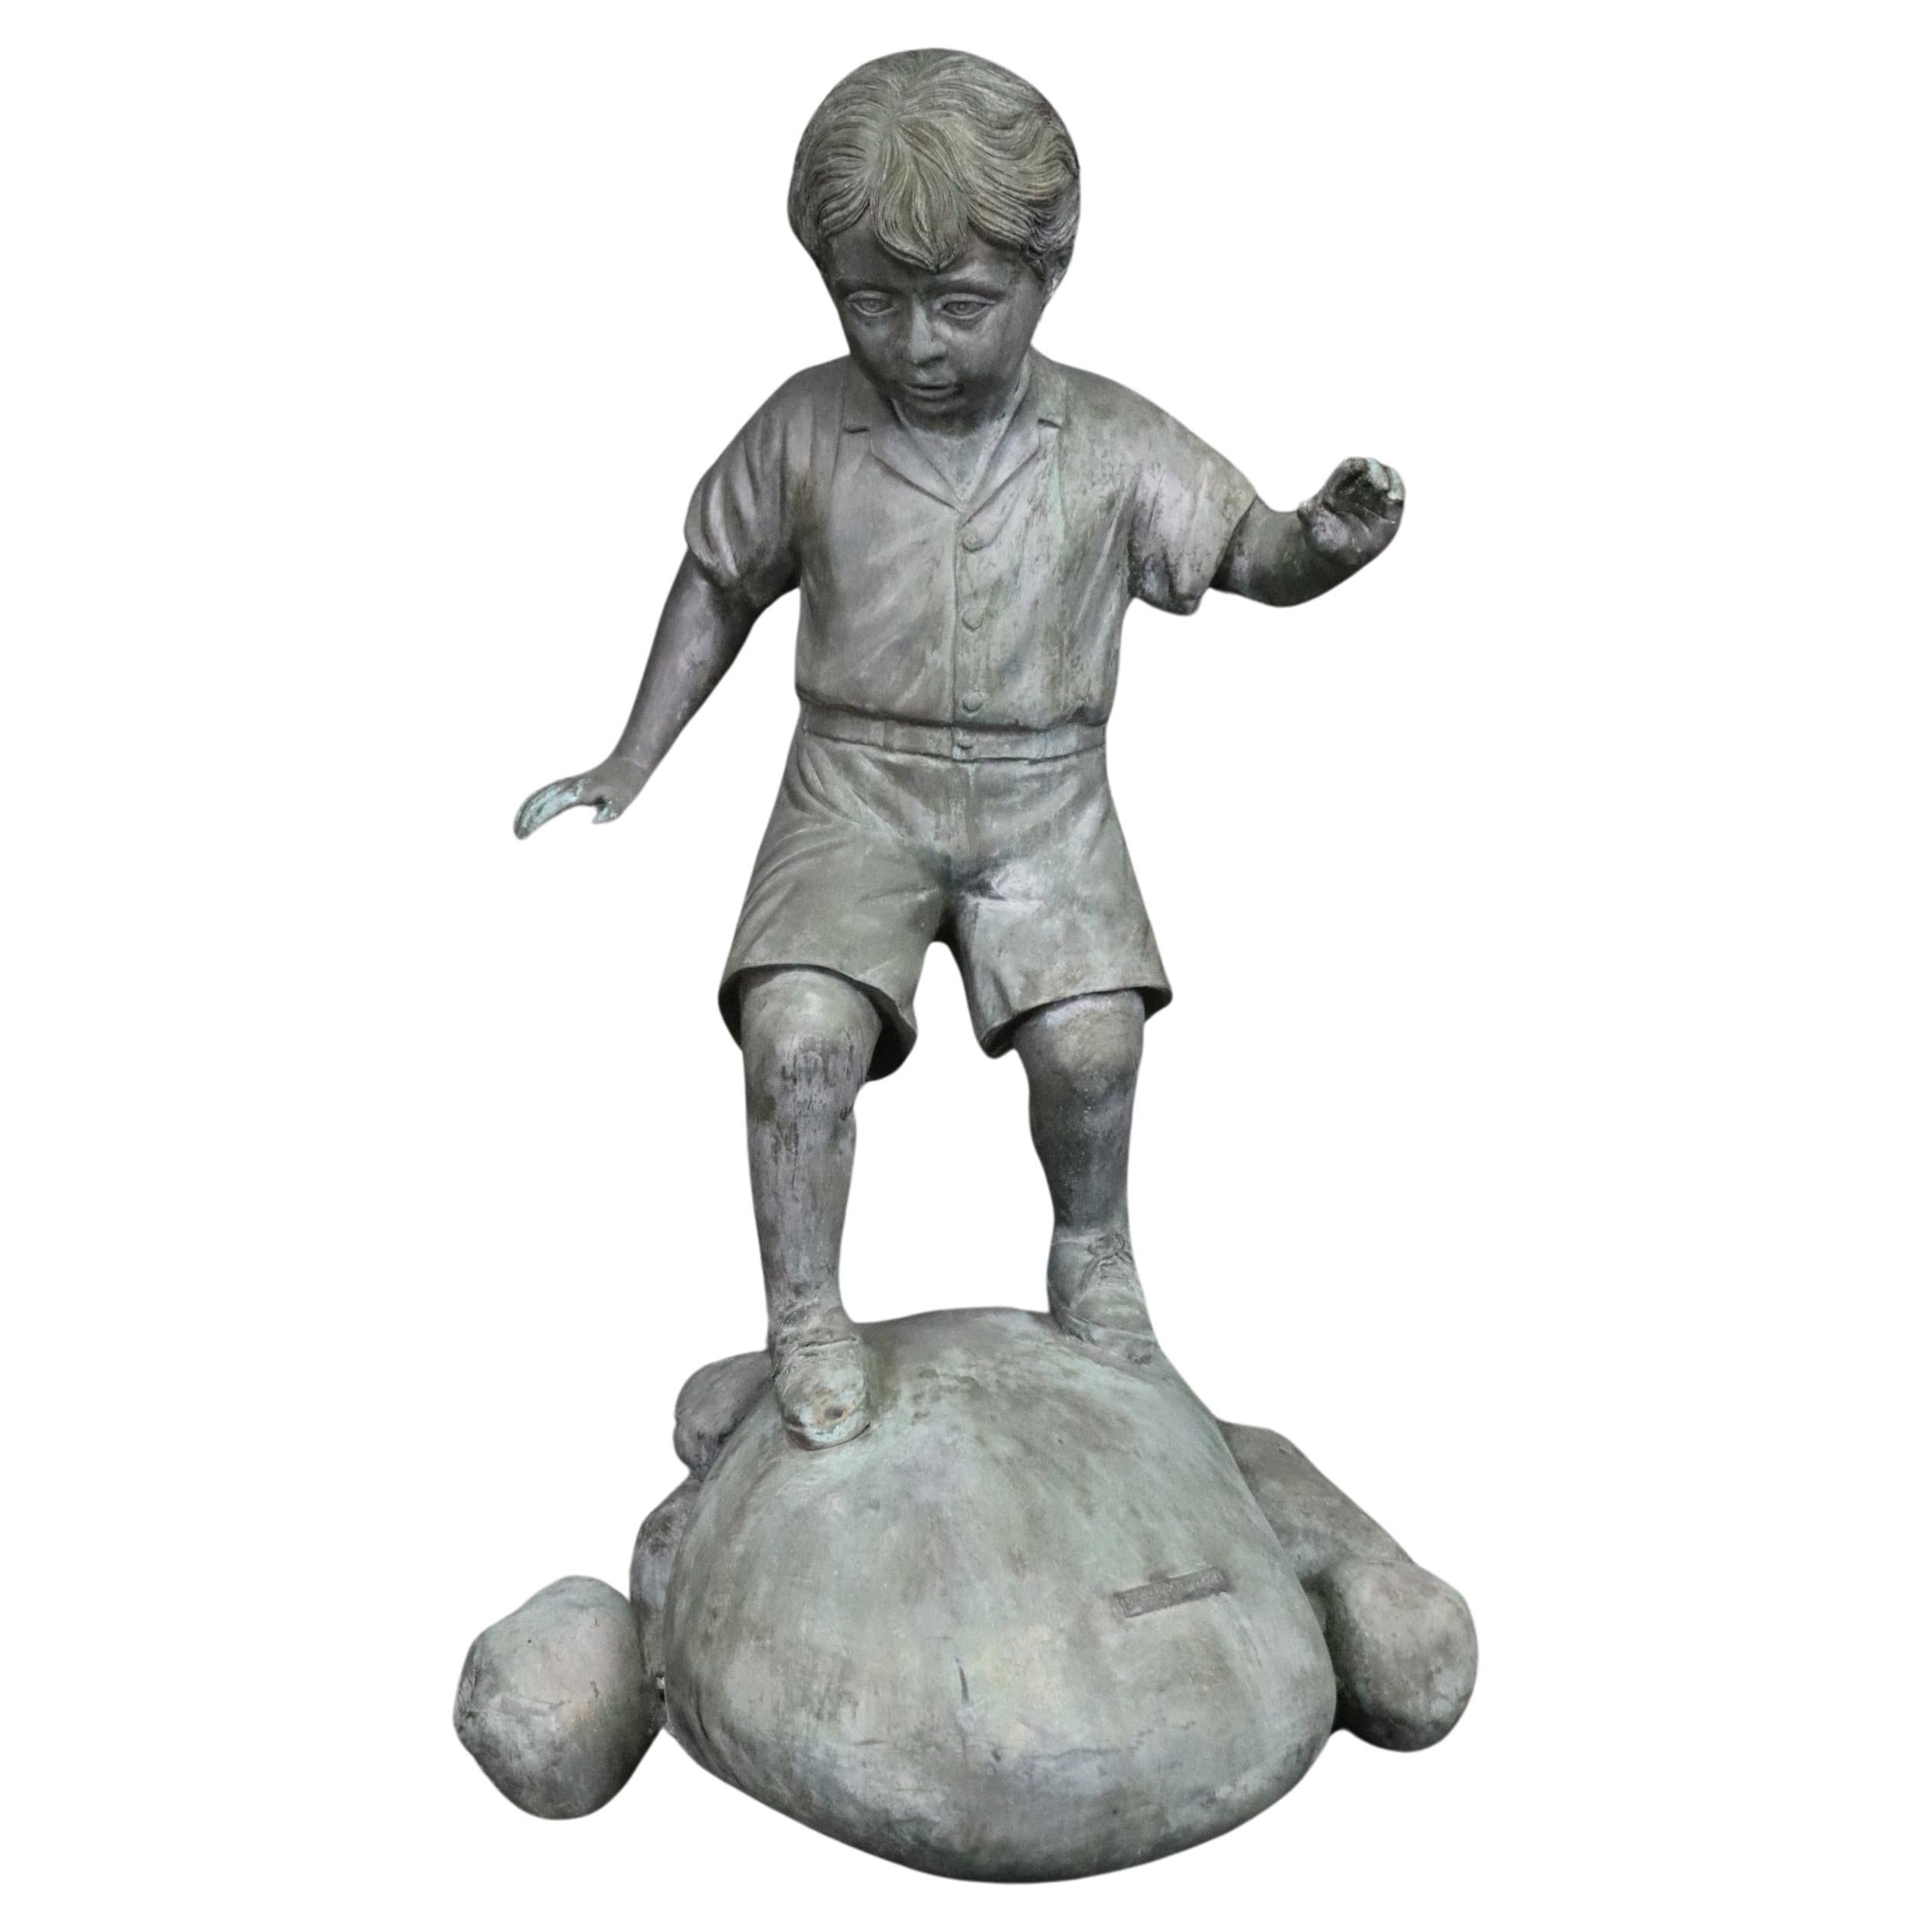 Bronze Elite by Henre in Verdi Gris Outdoor Statue of a Young Boy on a Rock